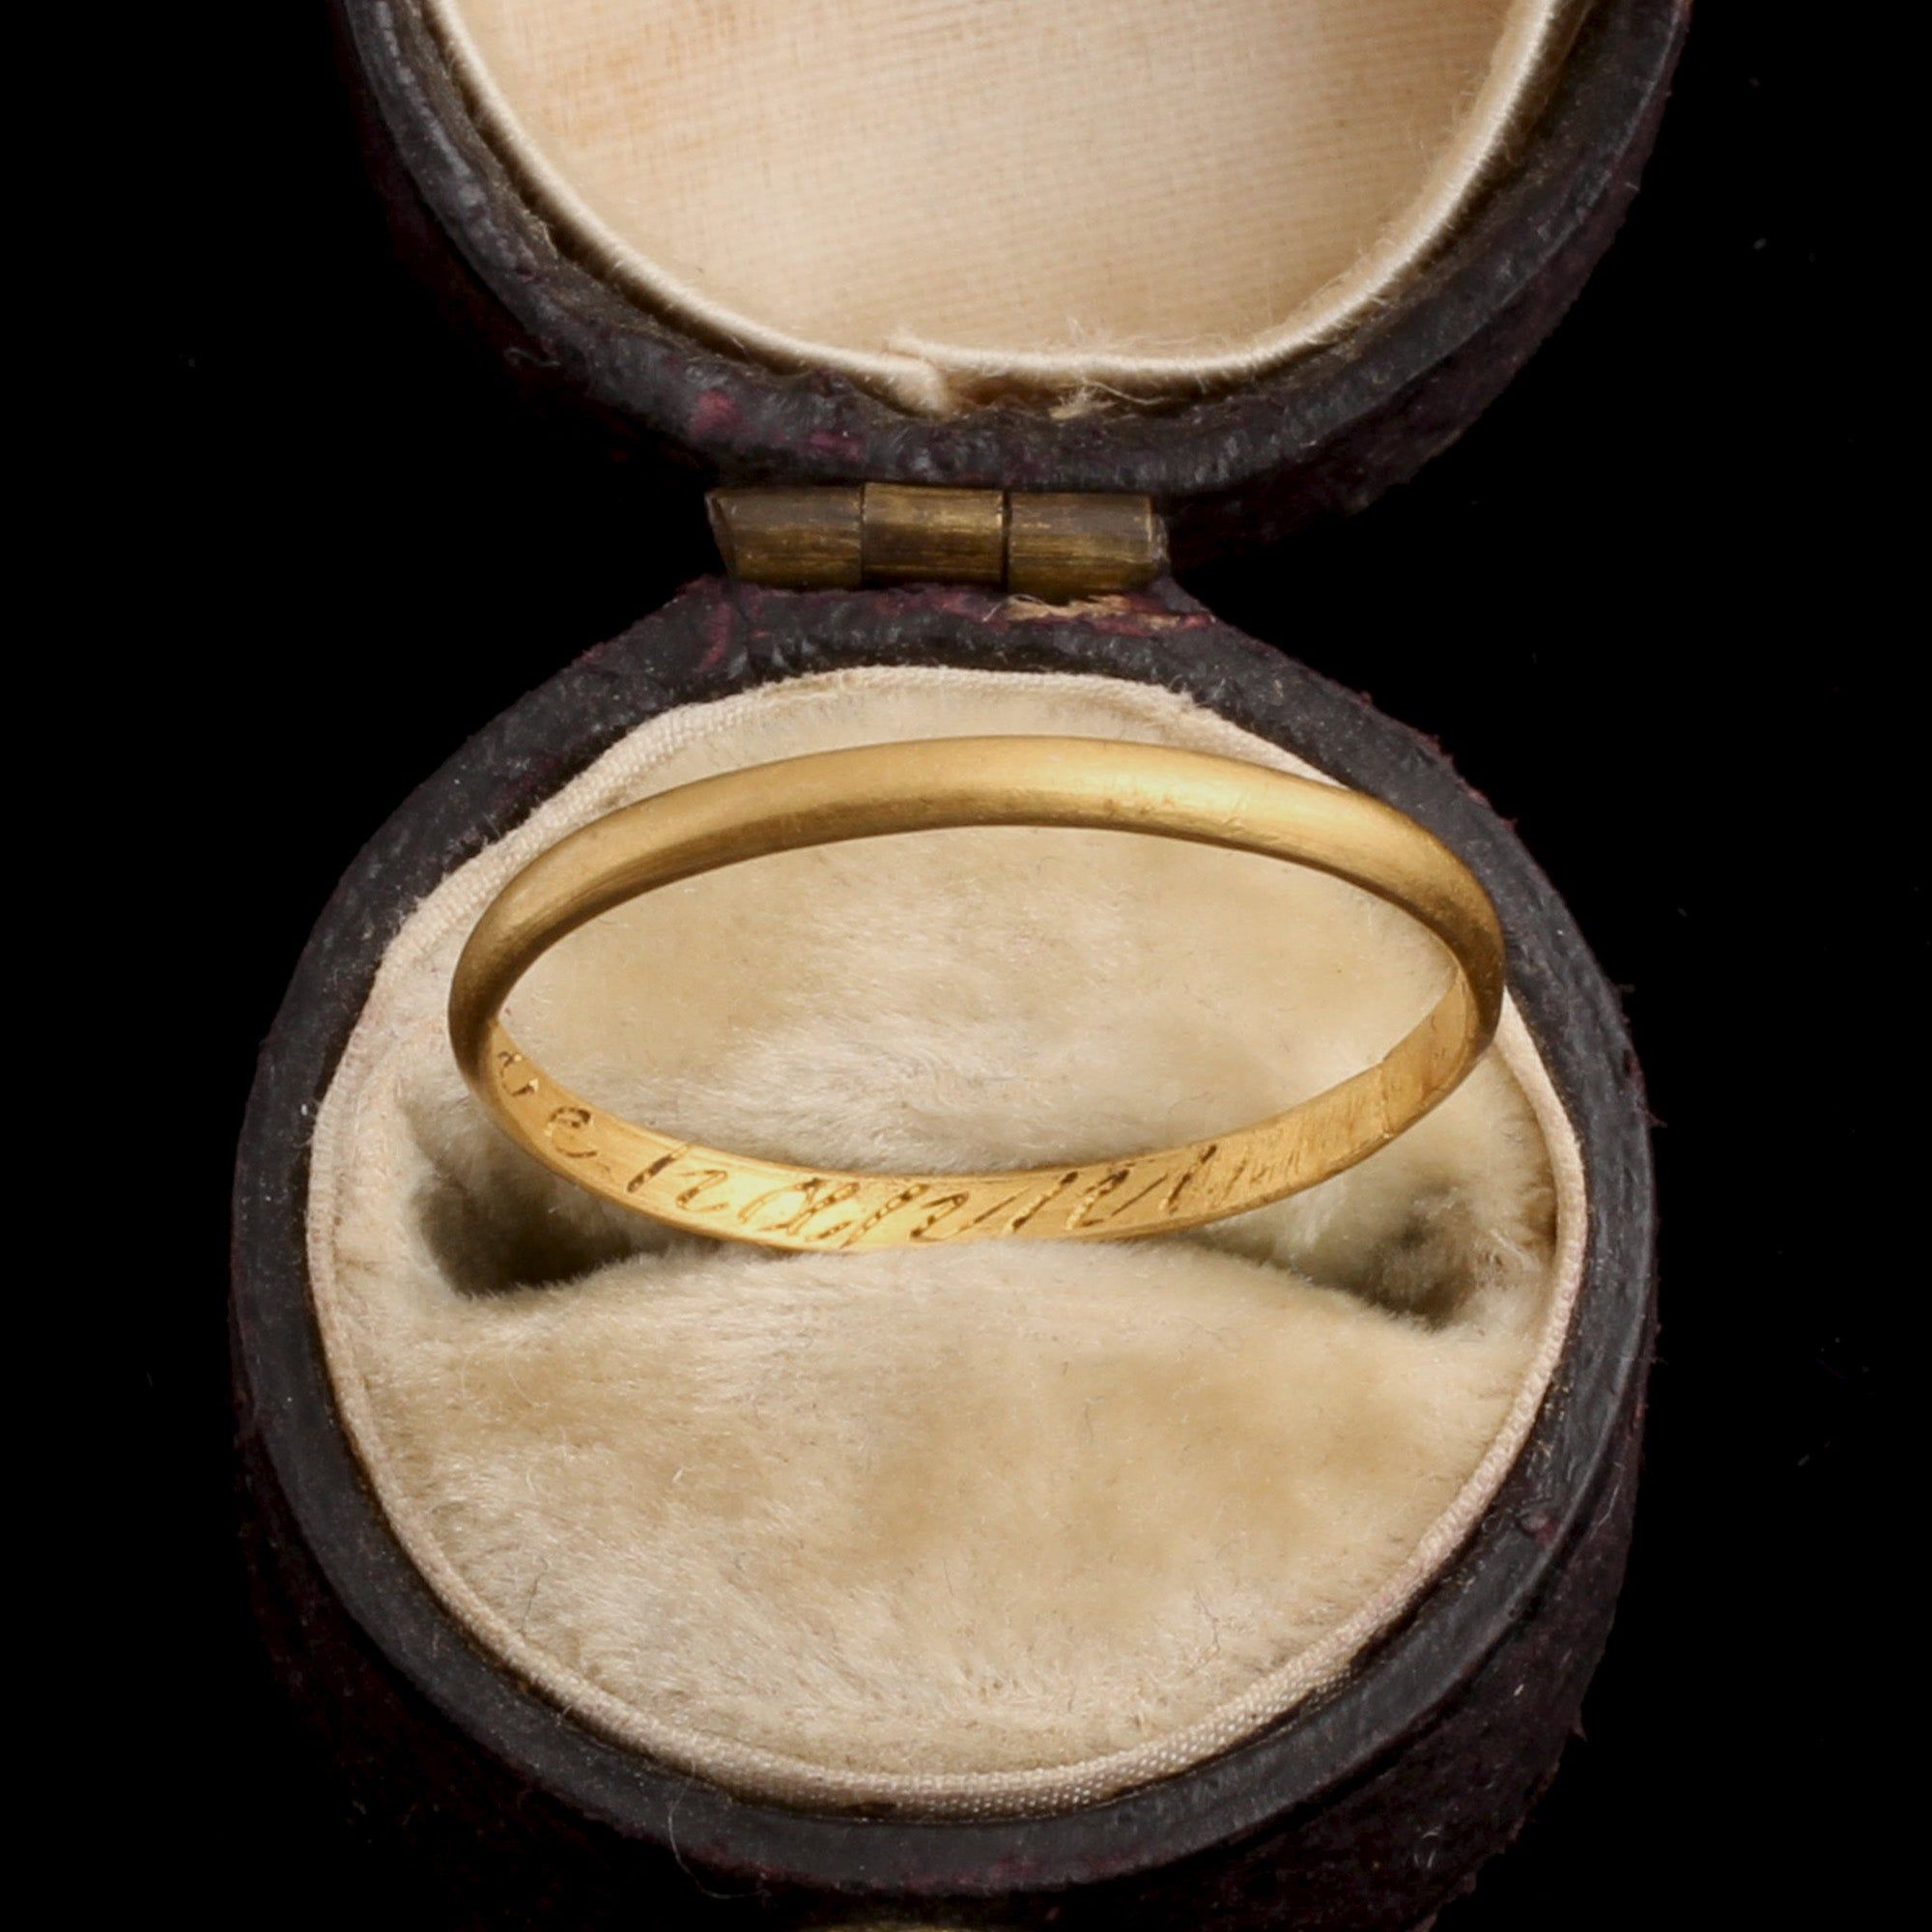 Late 18th Century "Love & Live Happy" Posy Ring